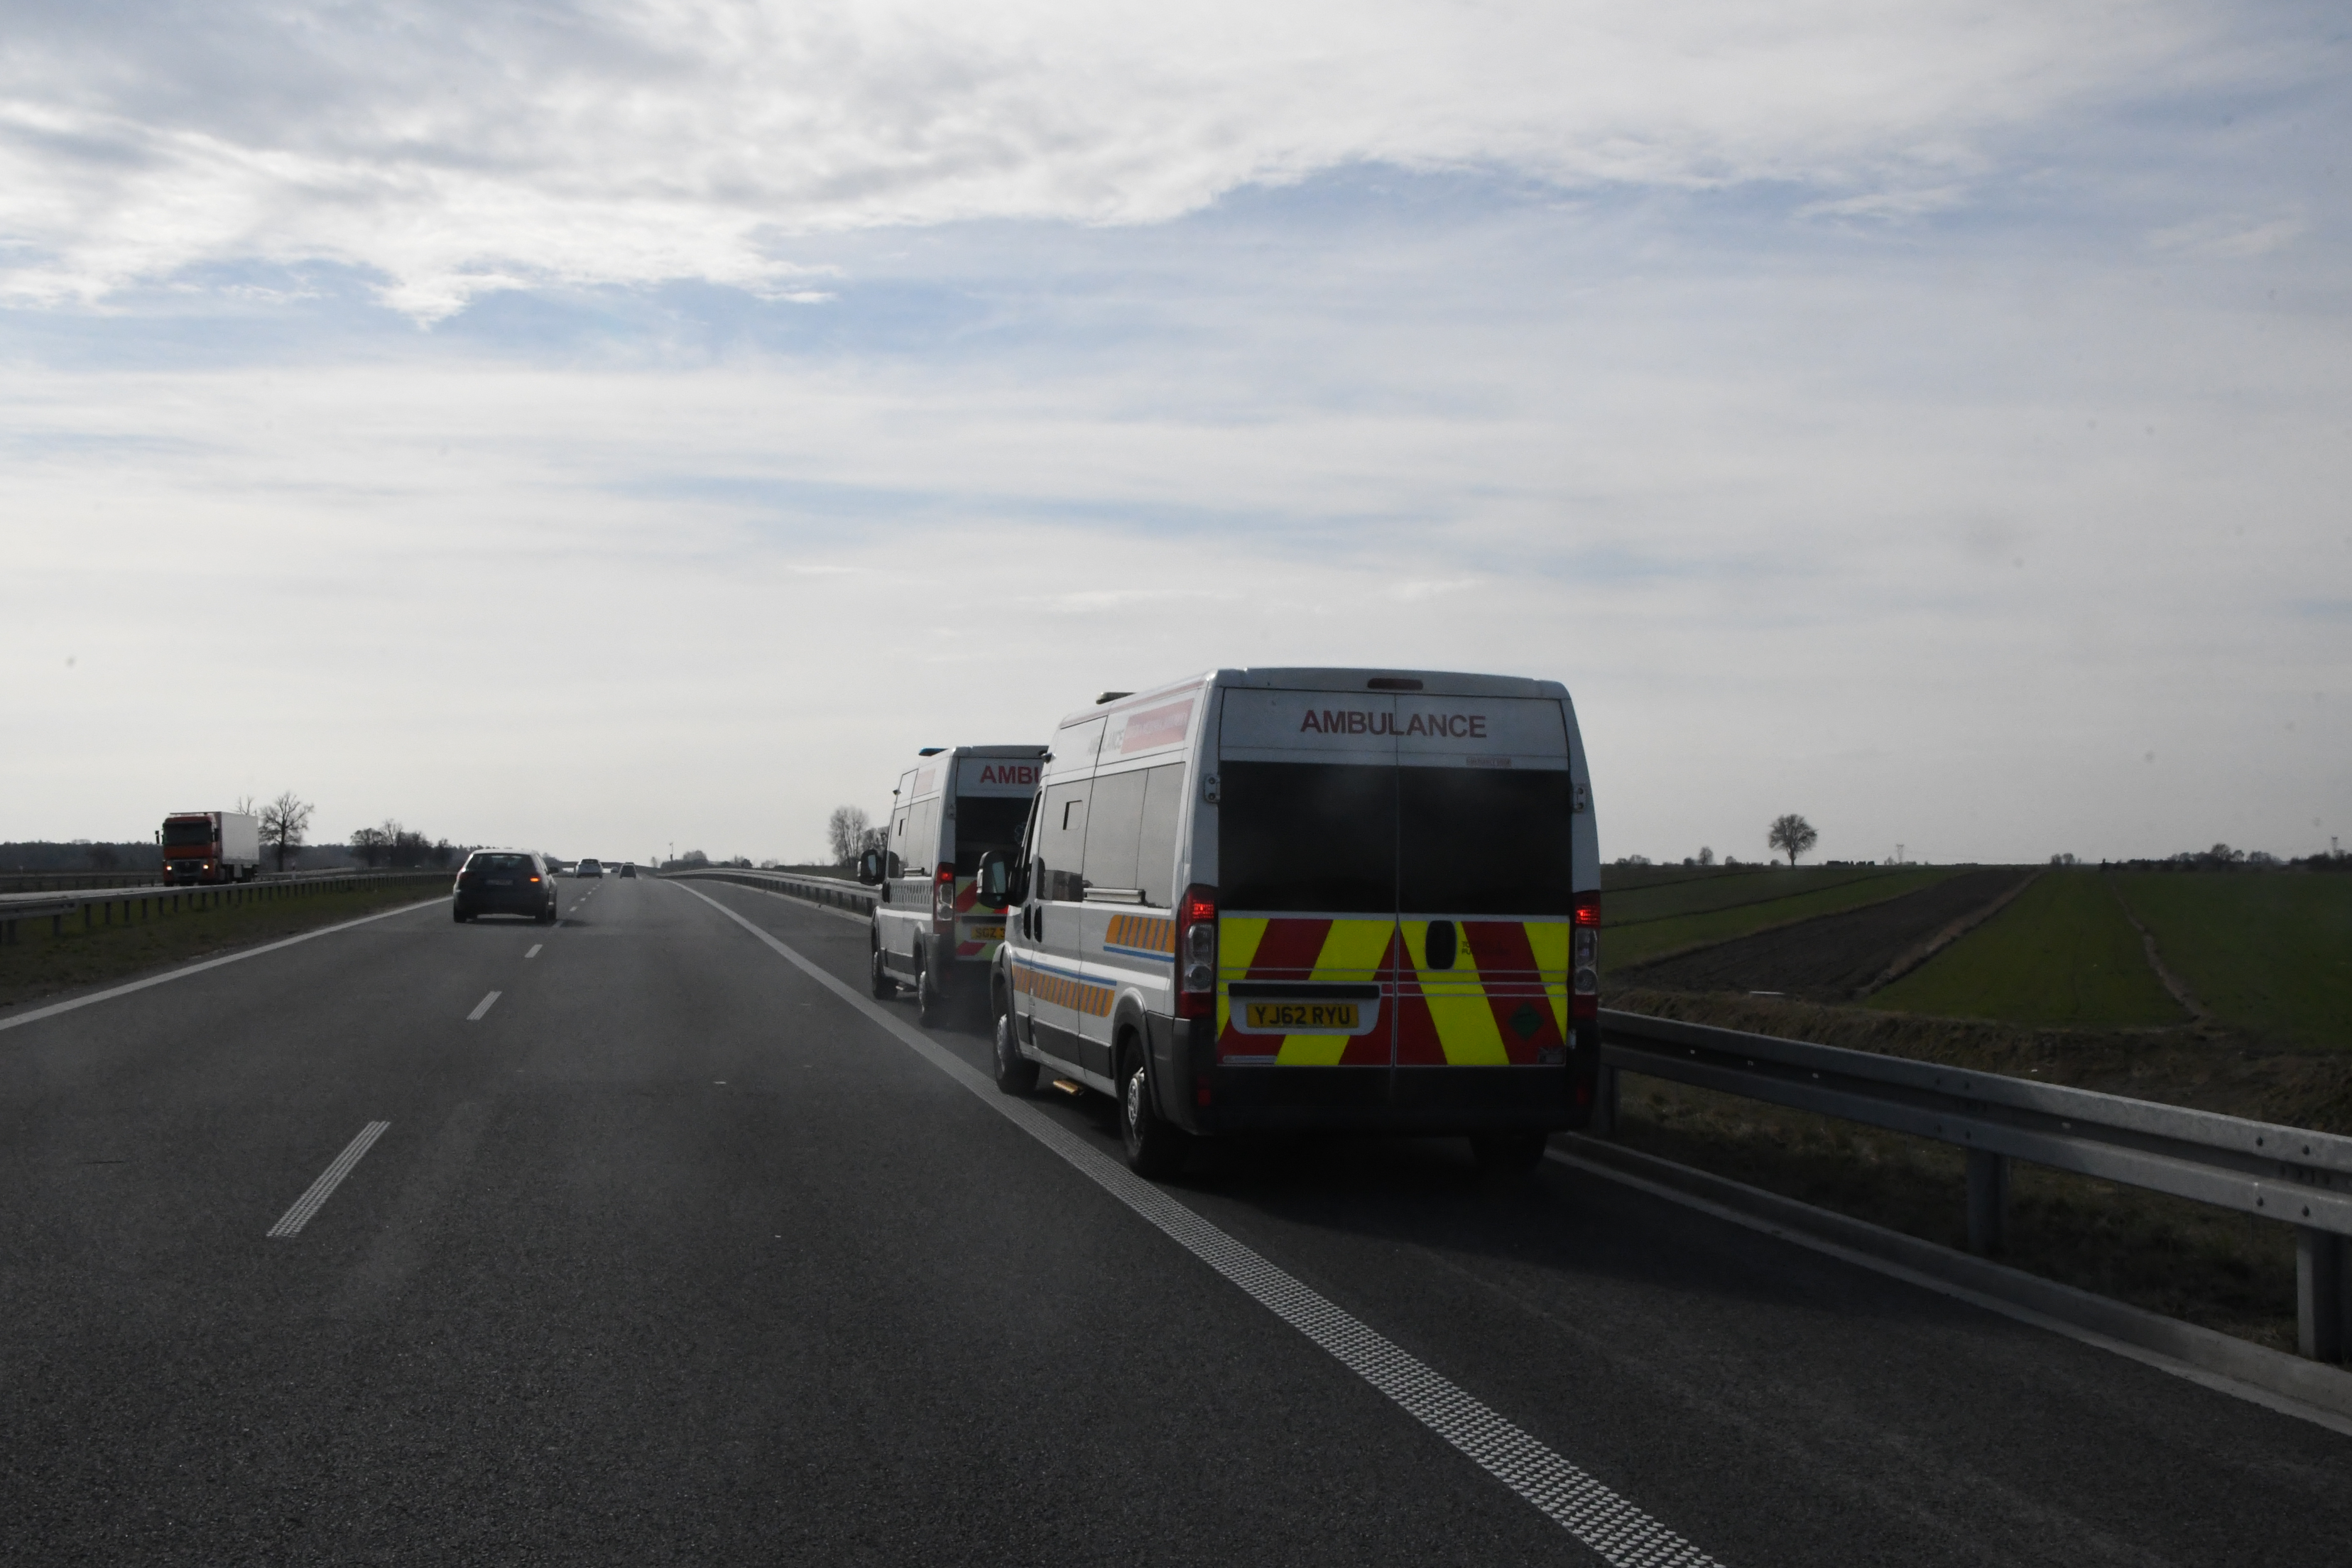 The two ambulances on the road